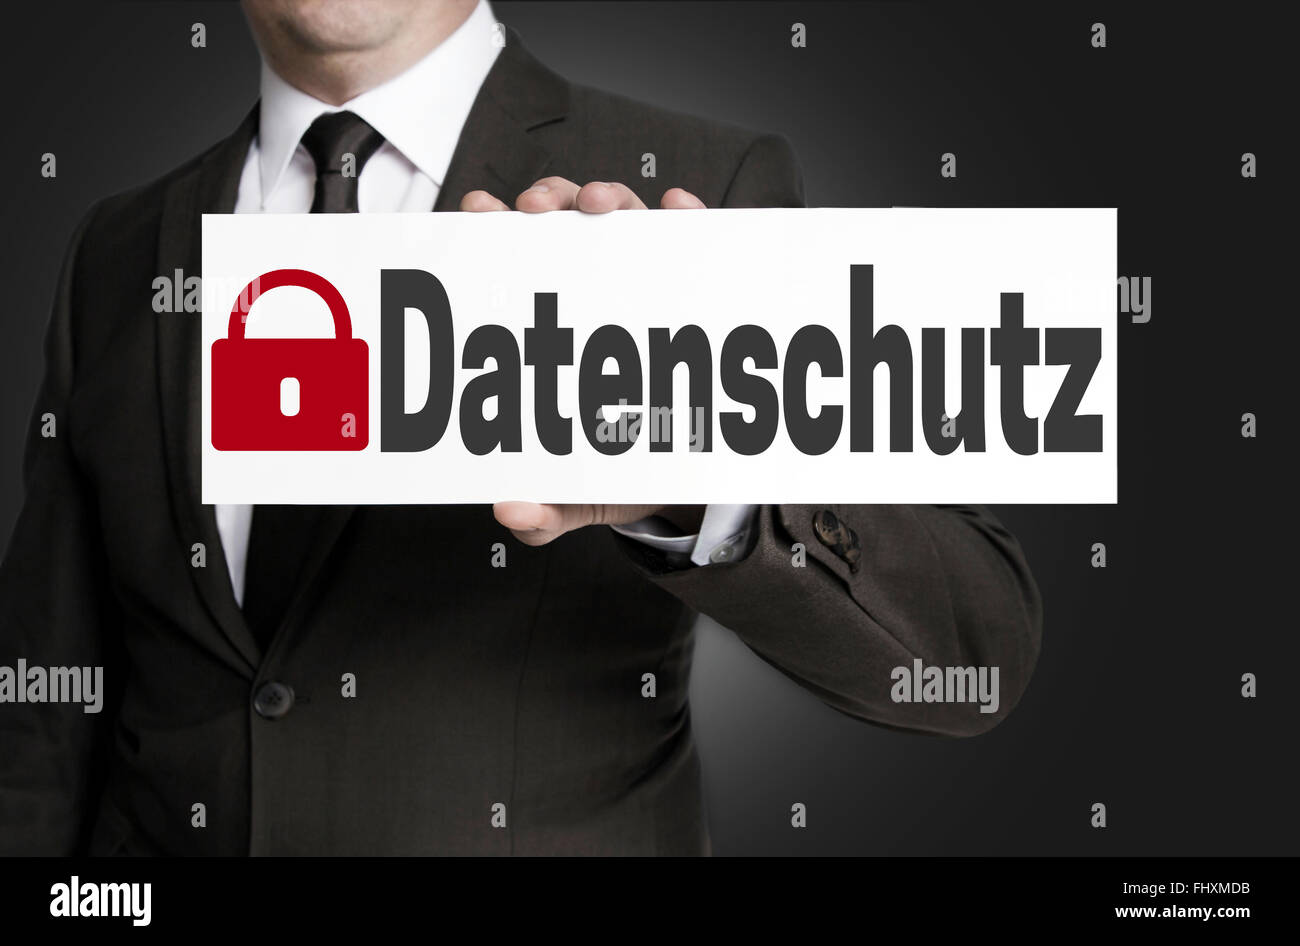 data protection (in german datenschutz) placard is held by businessman. Stock Photo